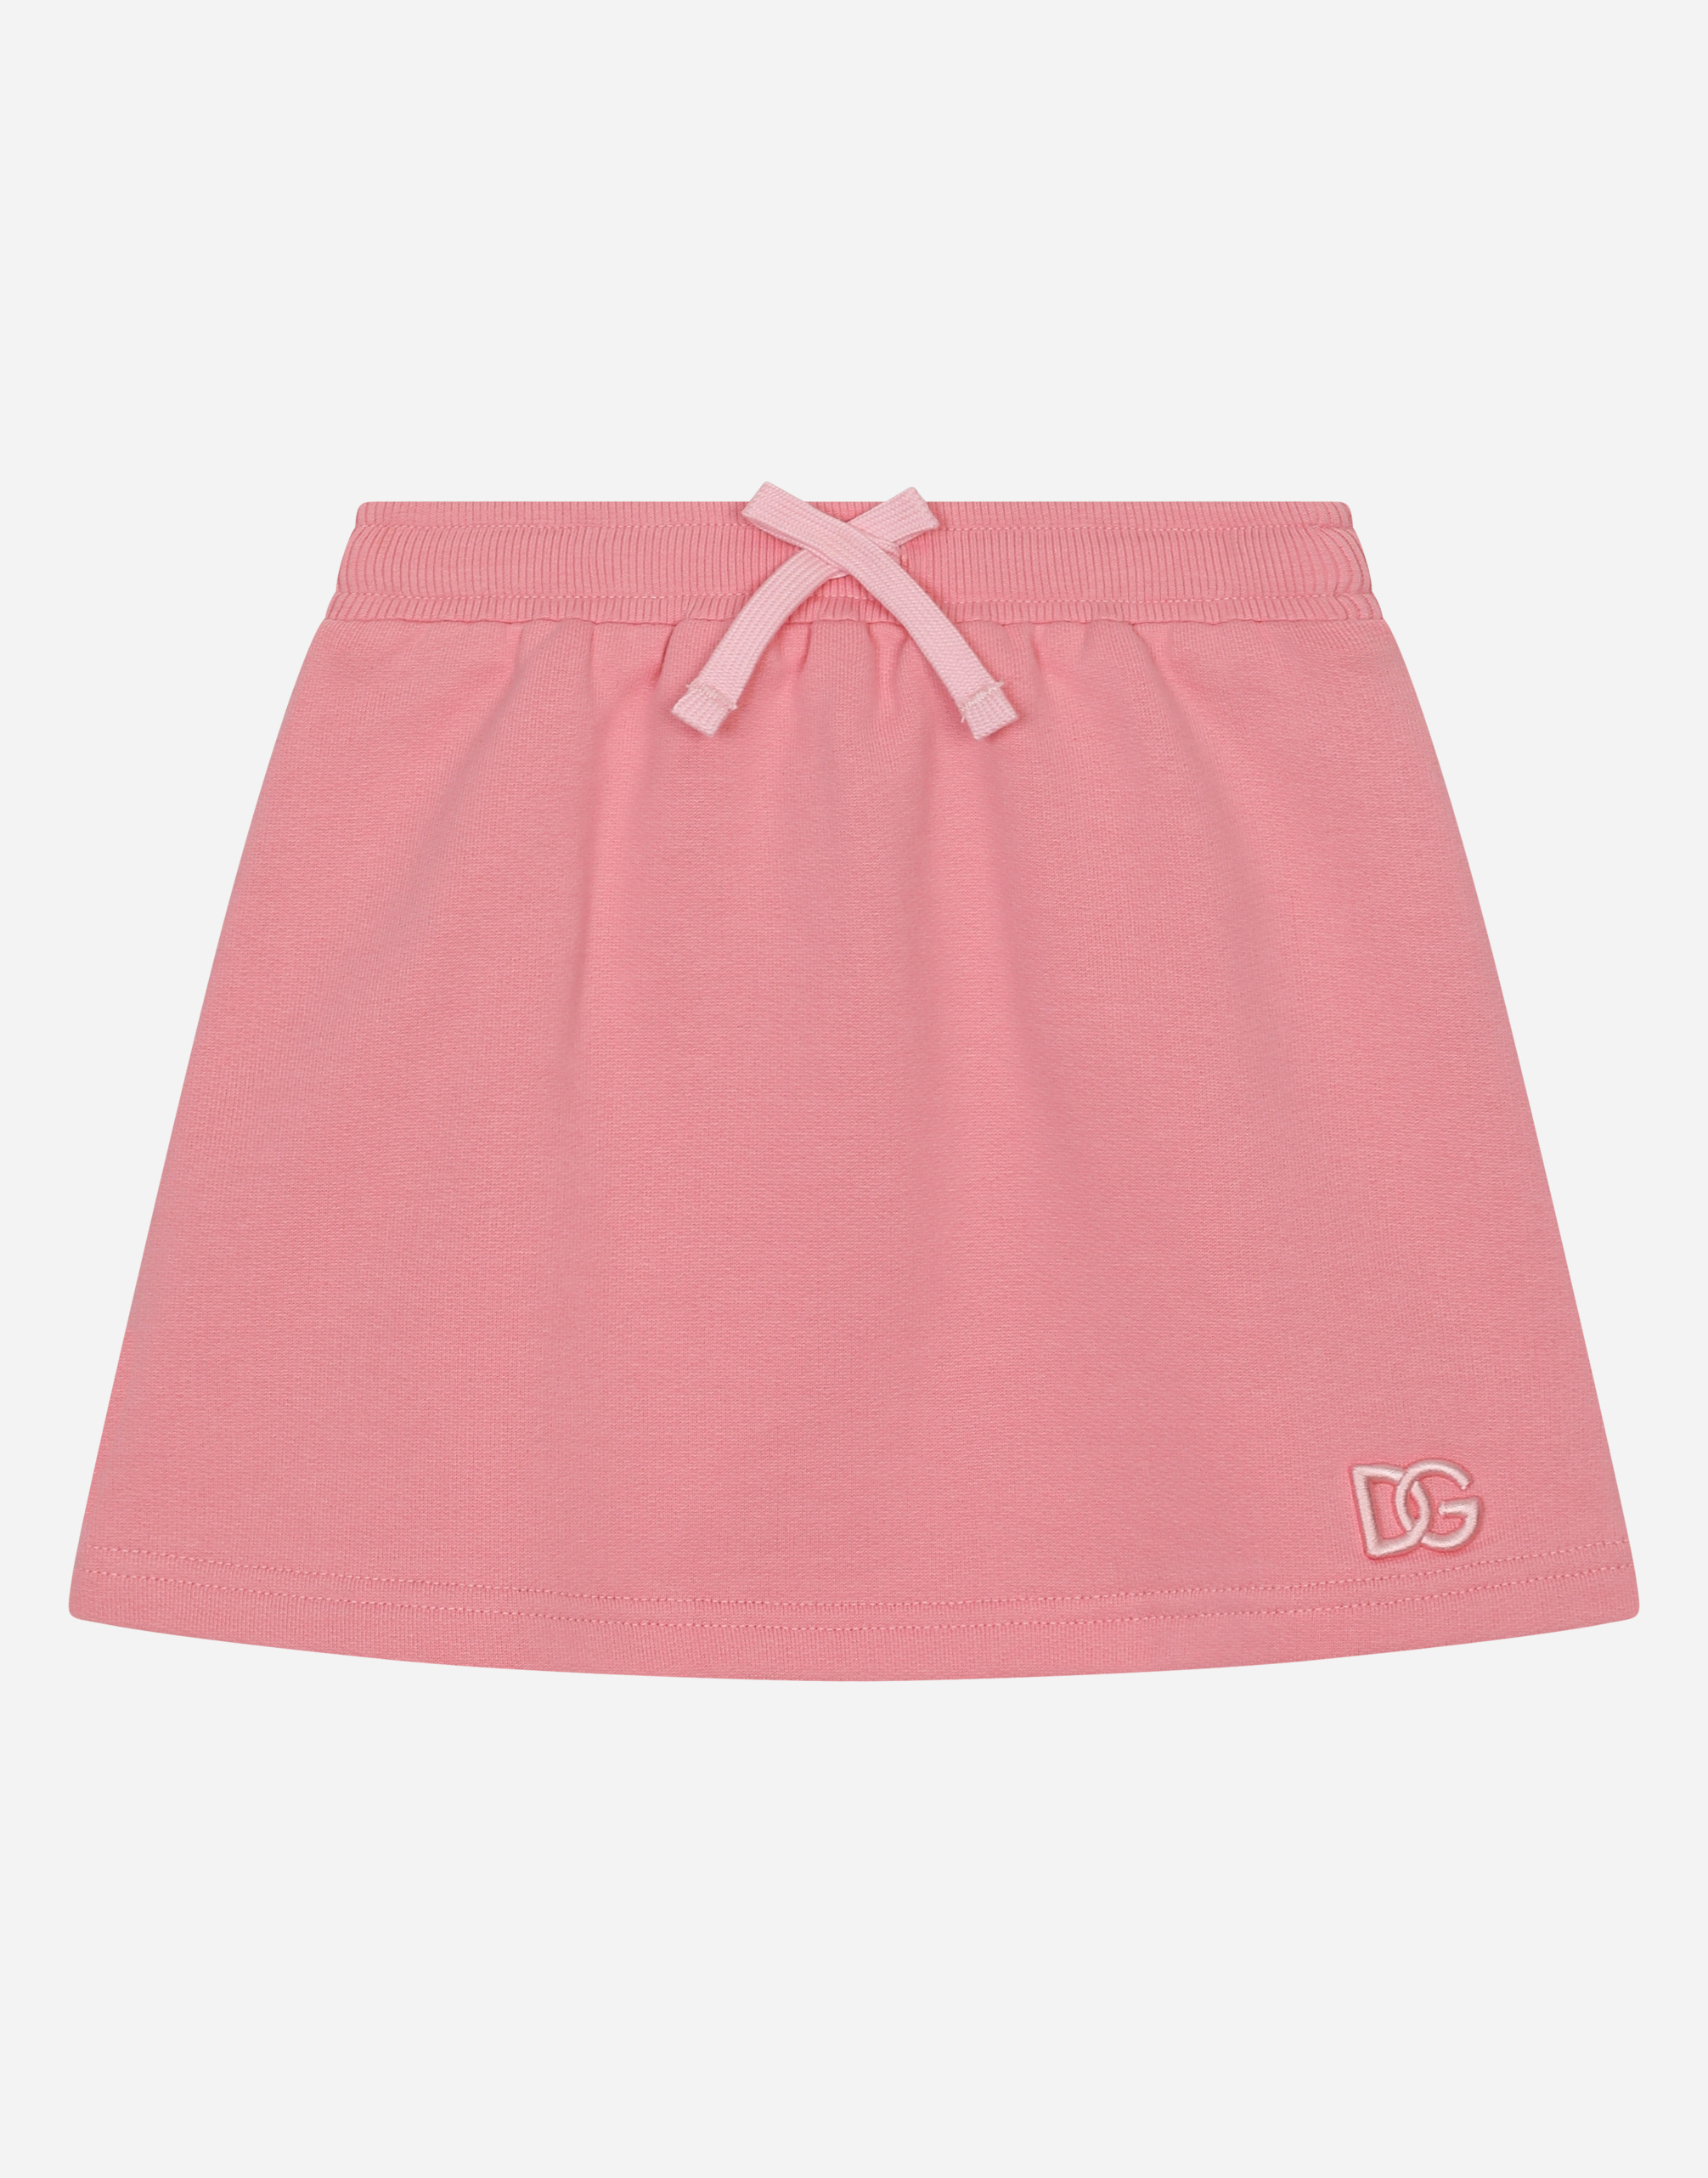 Short jersey skirt with DG logo embroidery in Pink